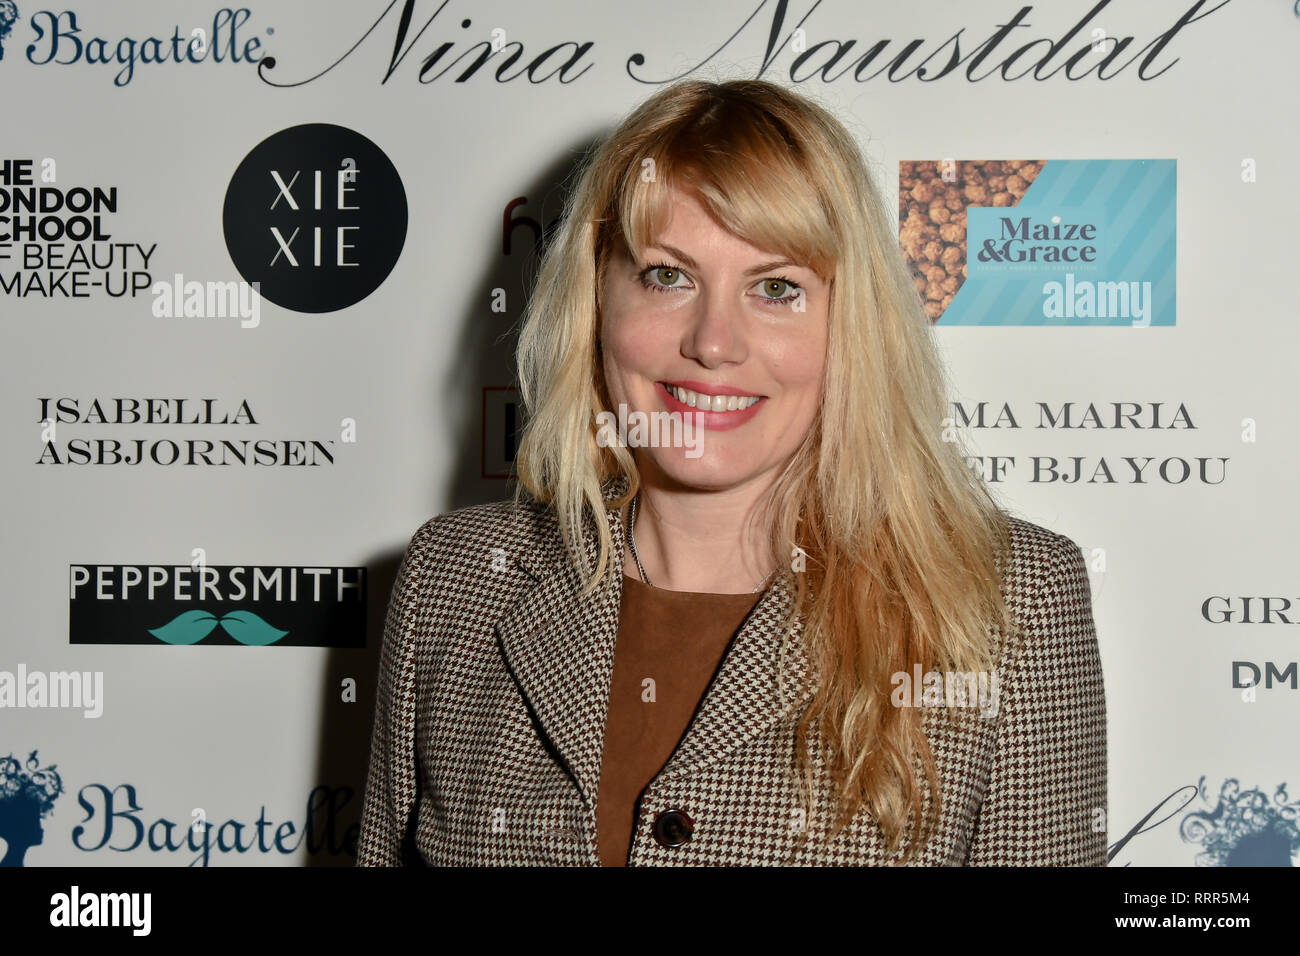 London, UK. 26th Feb 2019. Meredith Ostrom Arrivers at Nina Naustdal catwalk show SS19/20 collection by The London School of Beauty & Make-up at Bagatelle on 26 Feb 2019, London, UK. Credit: Picture Capital/Alamy Live News Stock Photo